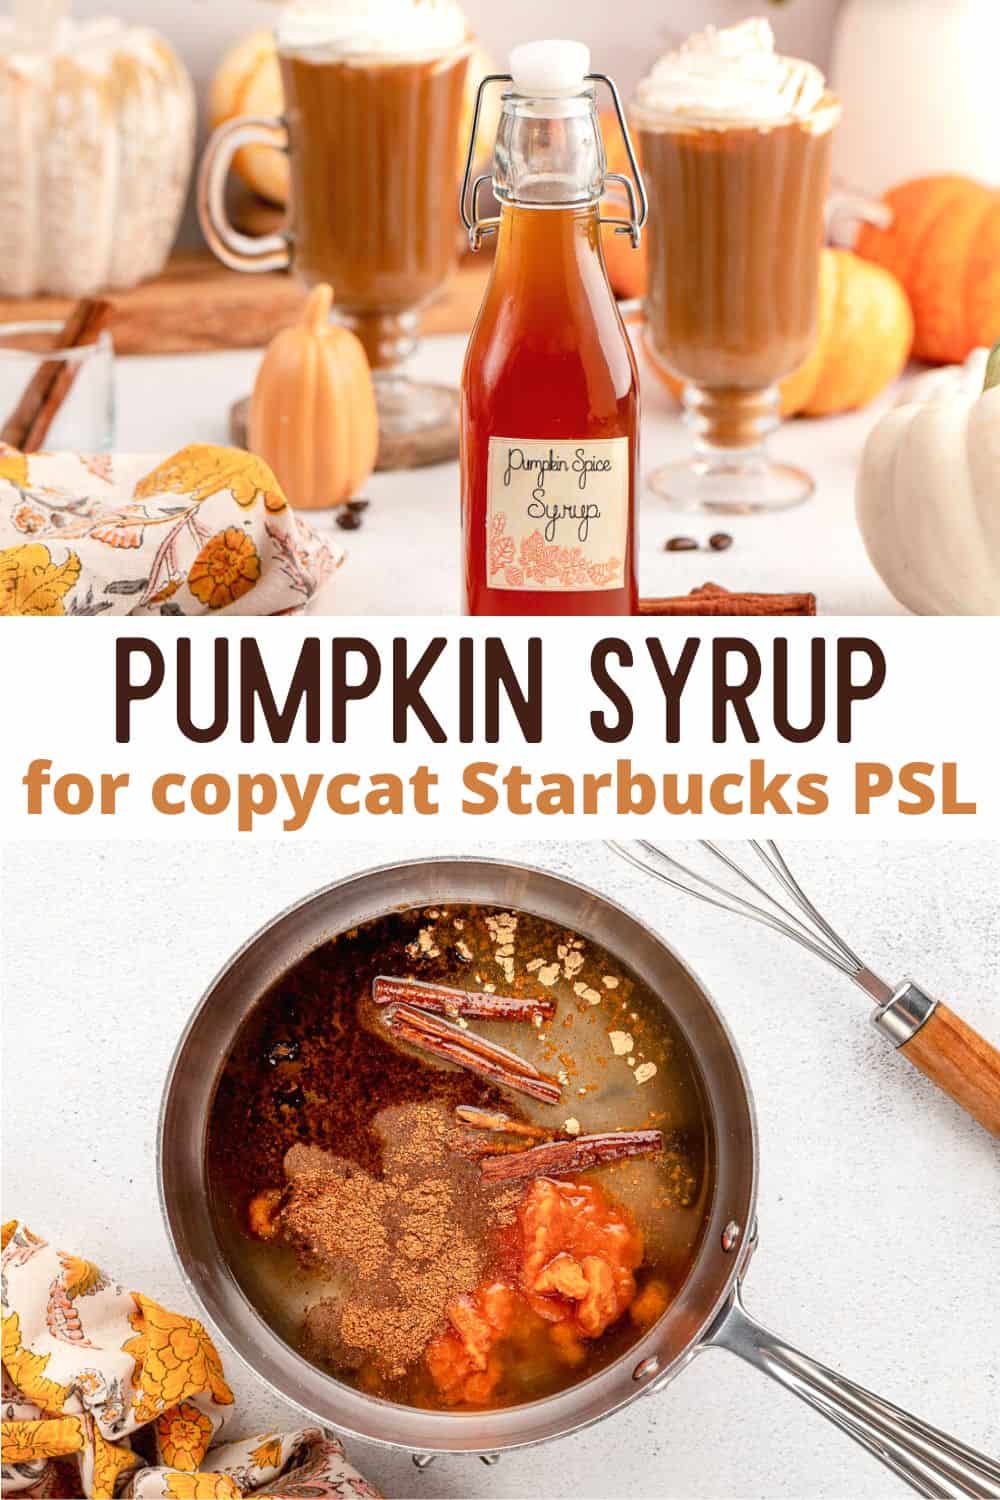 Make your own pumpkin spice latte at home with this easy pumpkin spice syrup recipe. Satisfy your craving with this delicious flavoring to your coffee or espresso!